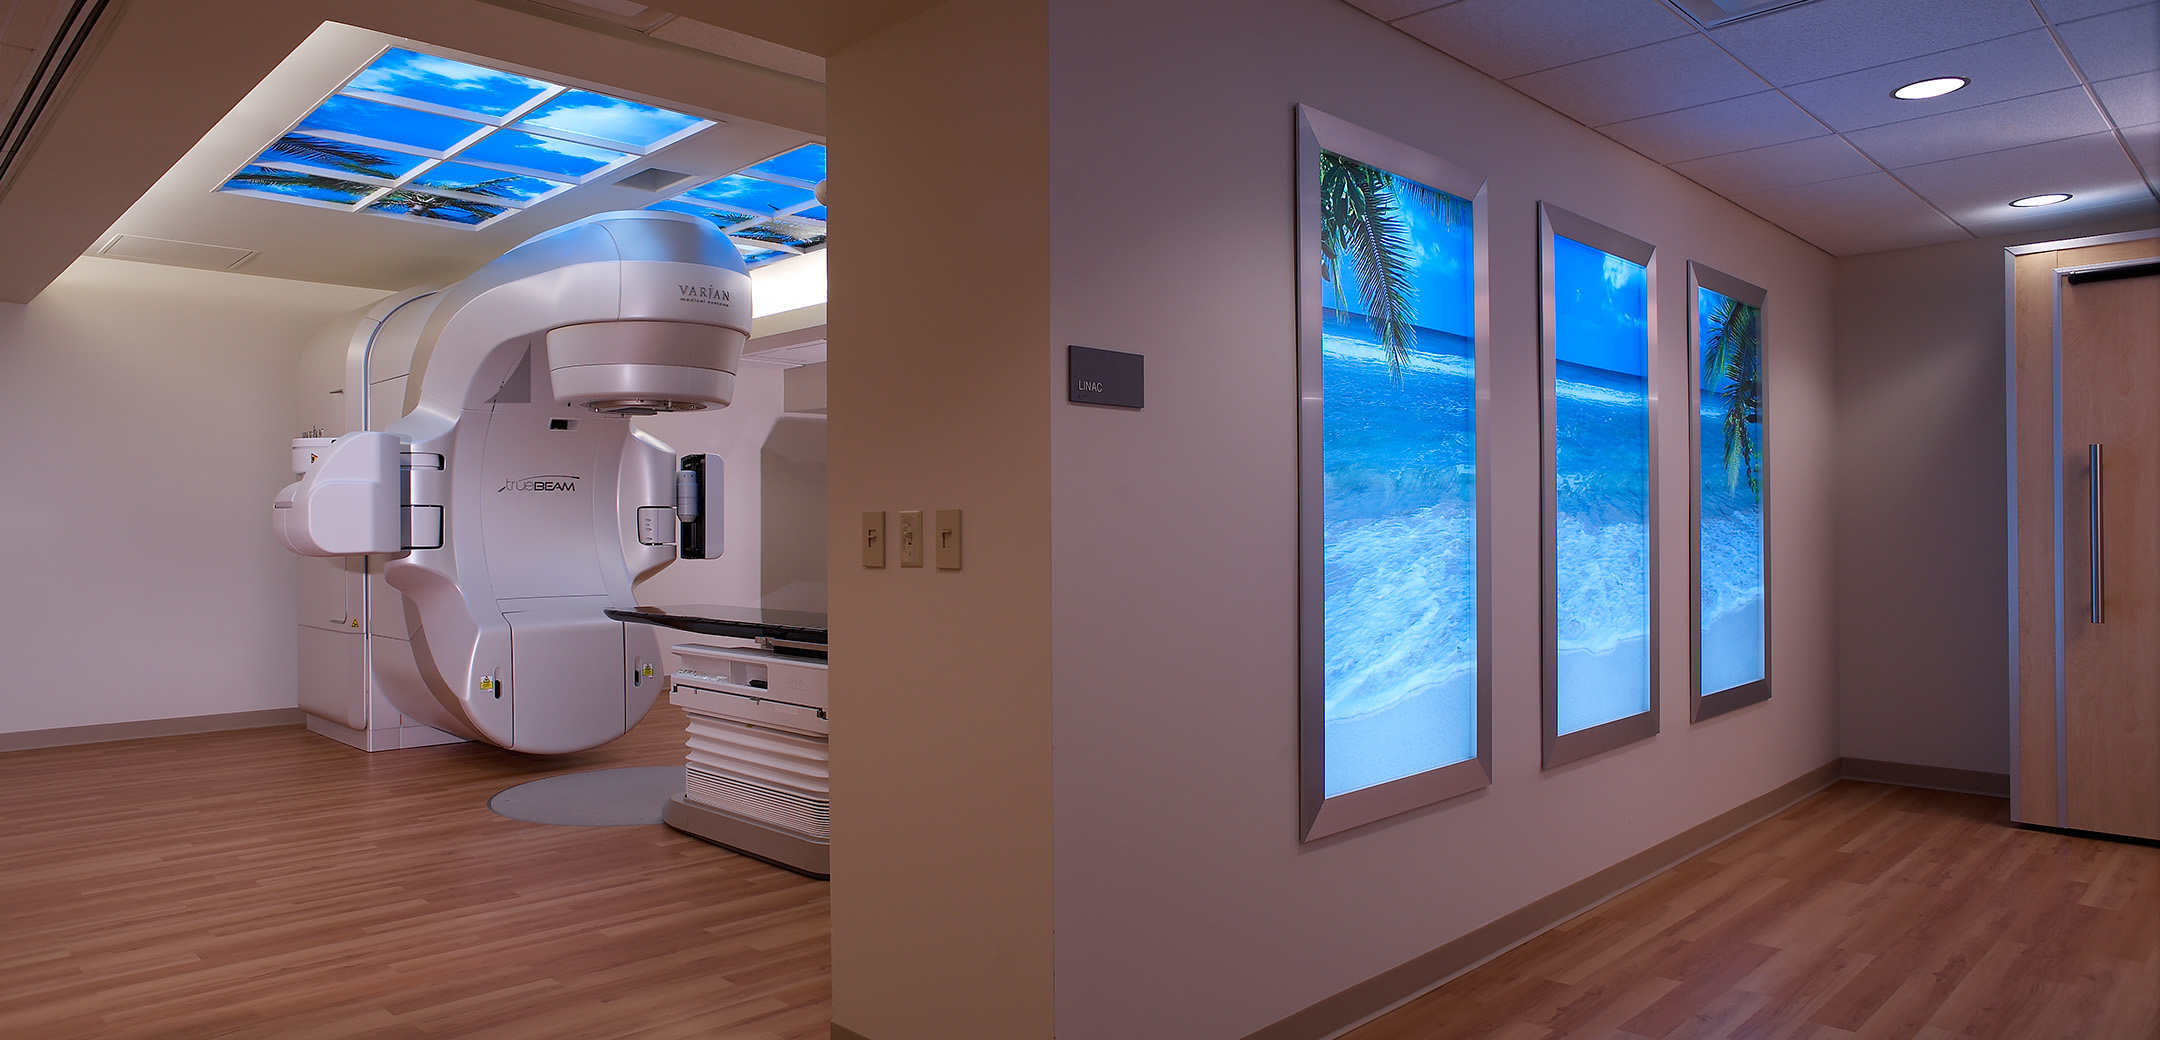 An interior view of the Abramson Cancer Center showcasing the view from the outside to the inside of the large medical inspection room with scanning equipment.